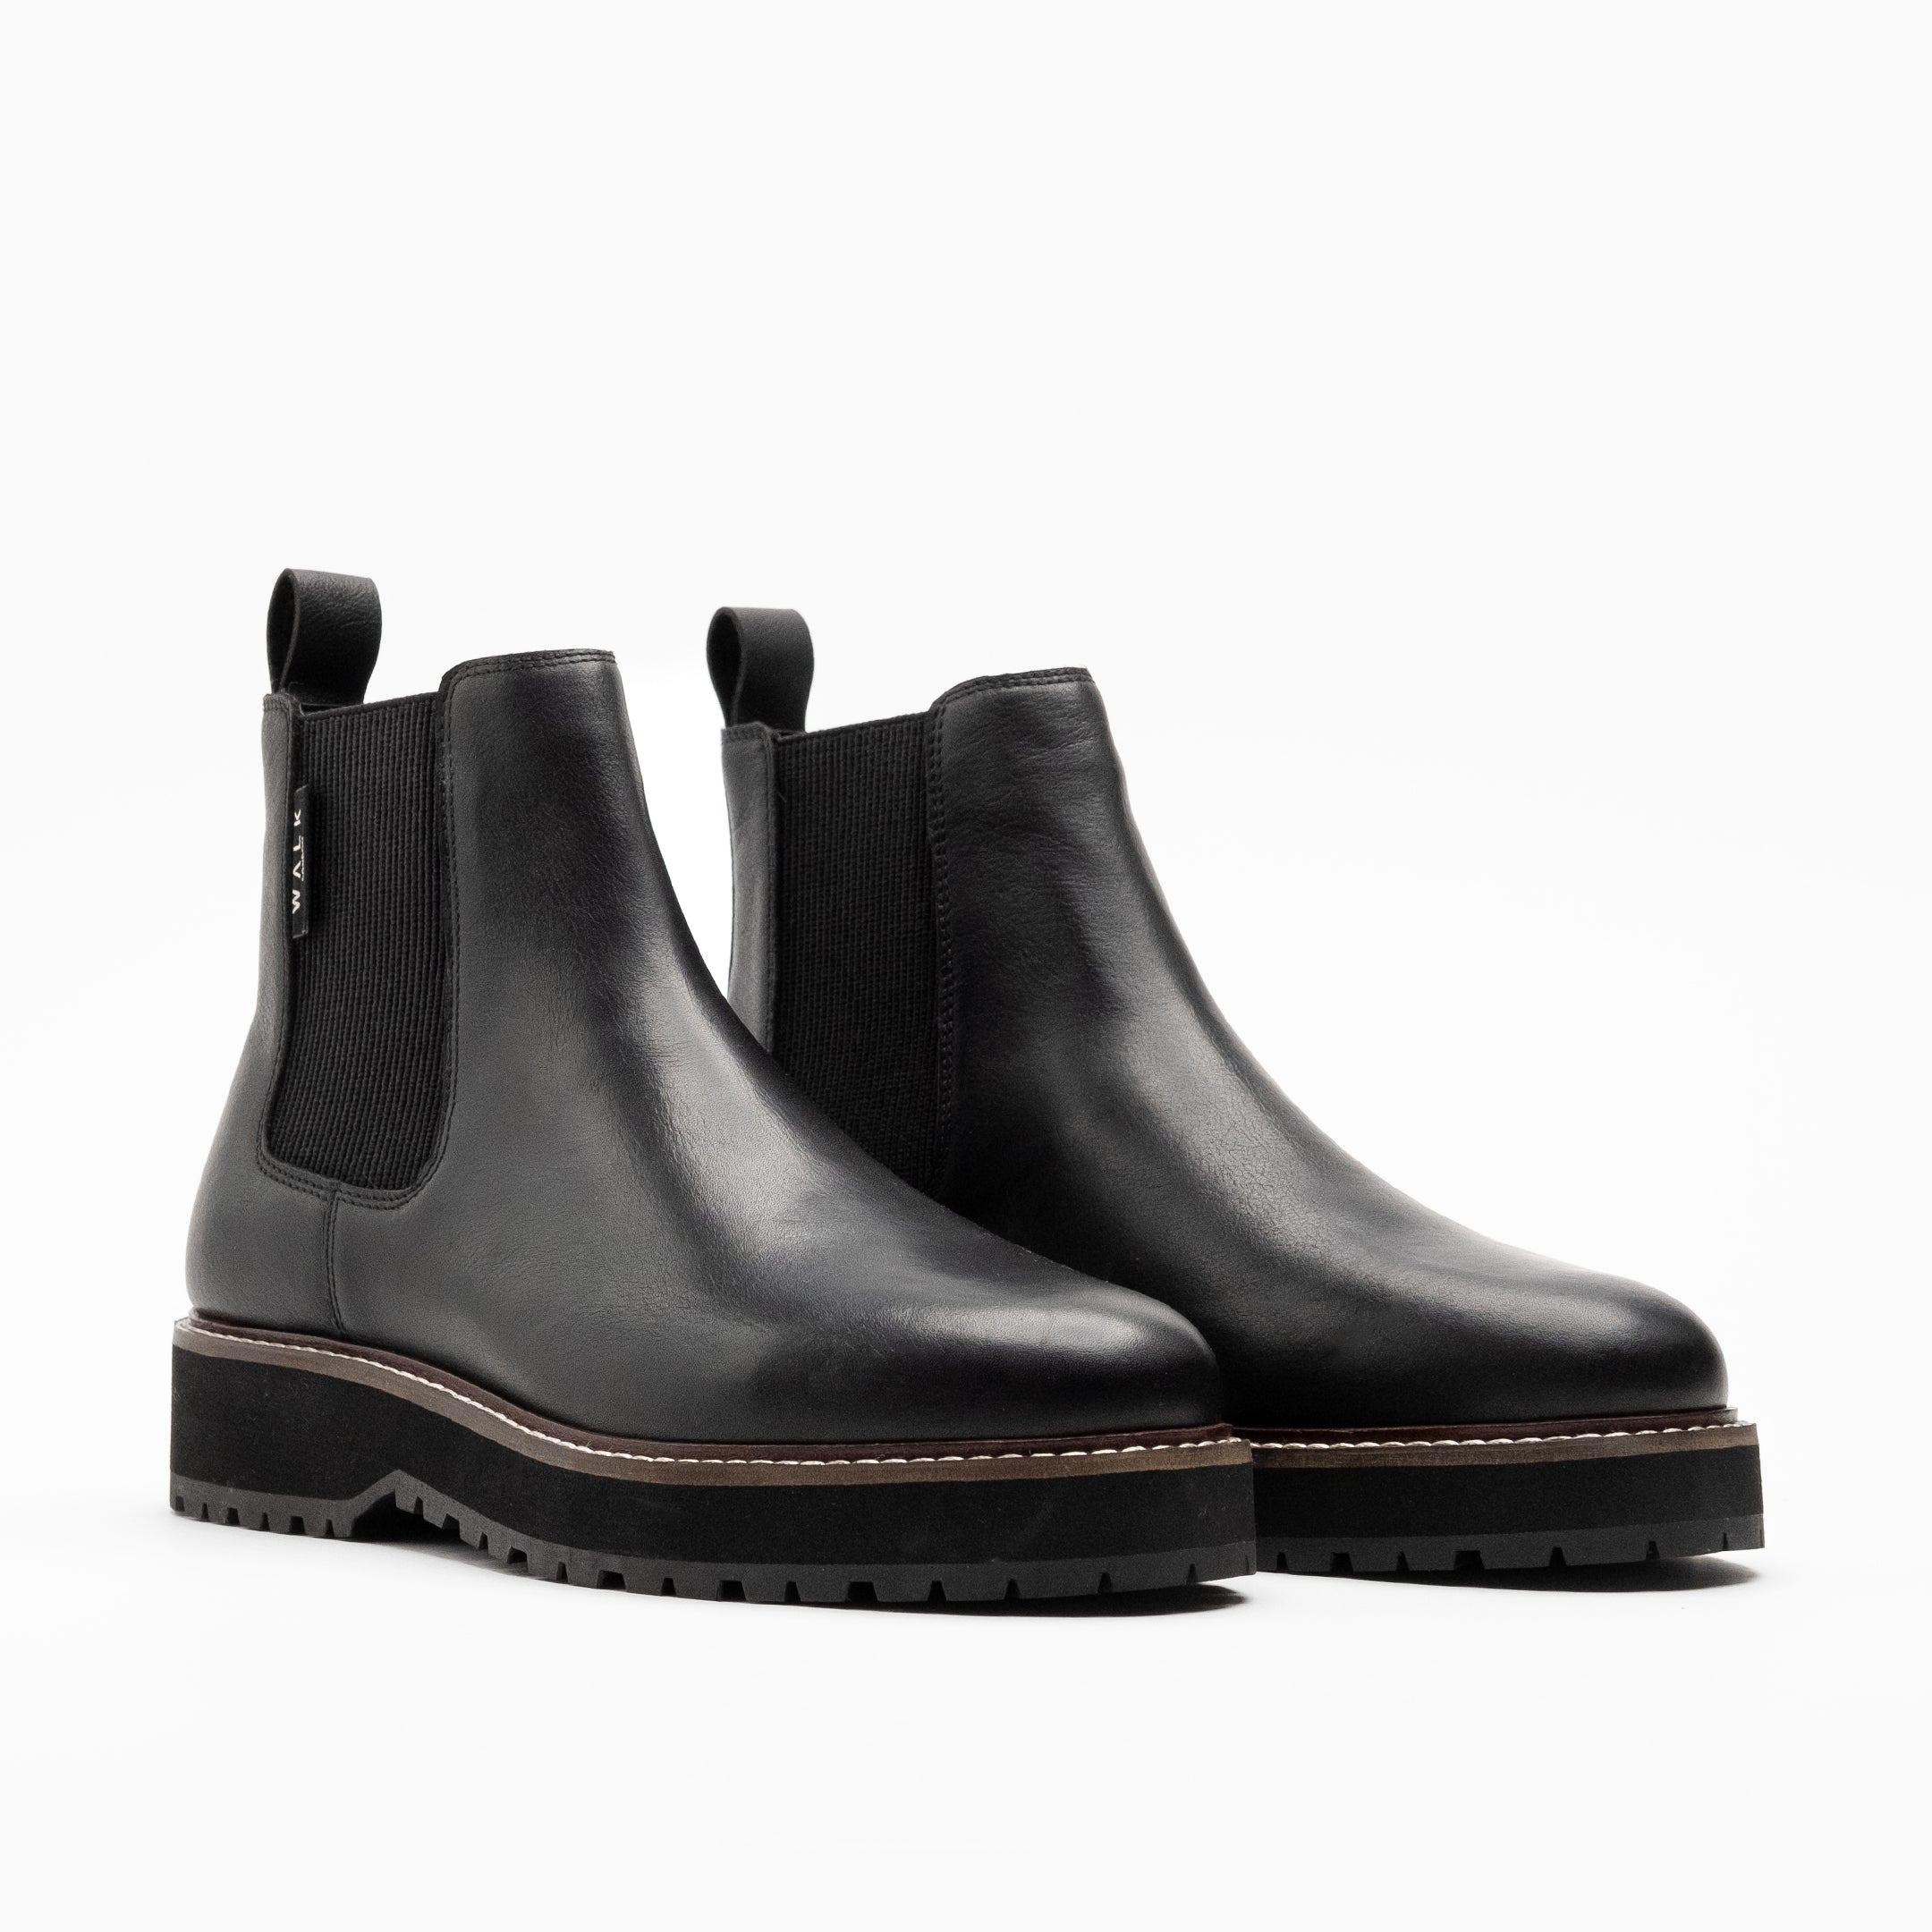 Walk London Mens Connery Chelsea Boot in Black Leather